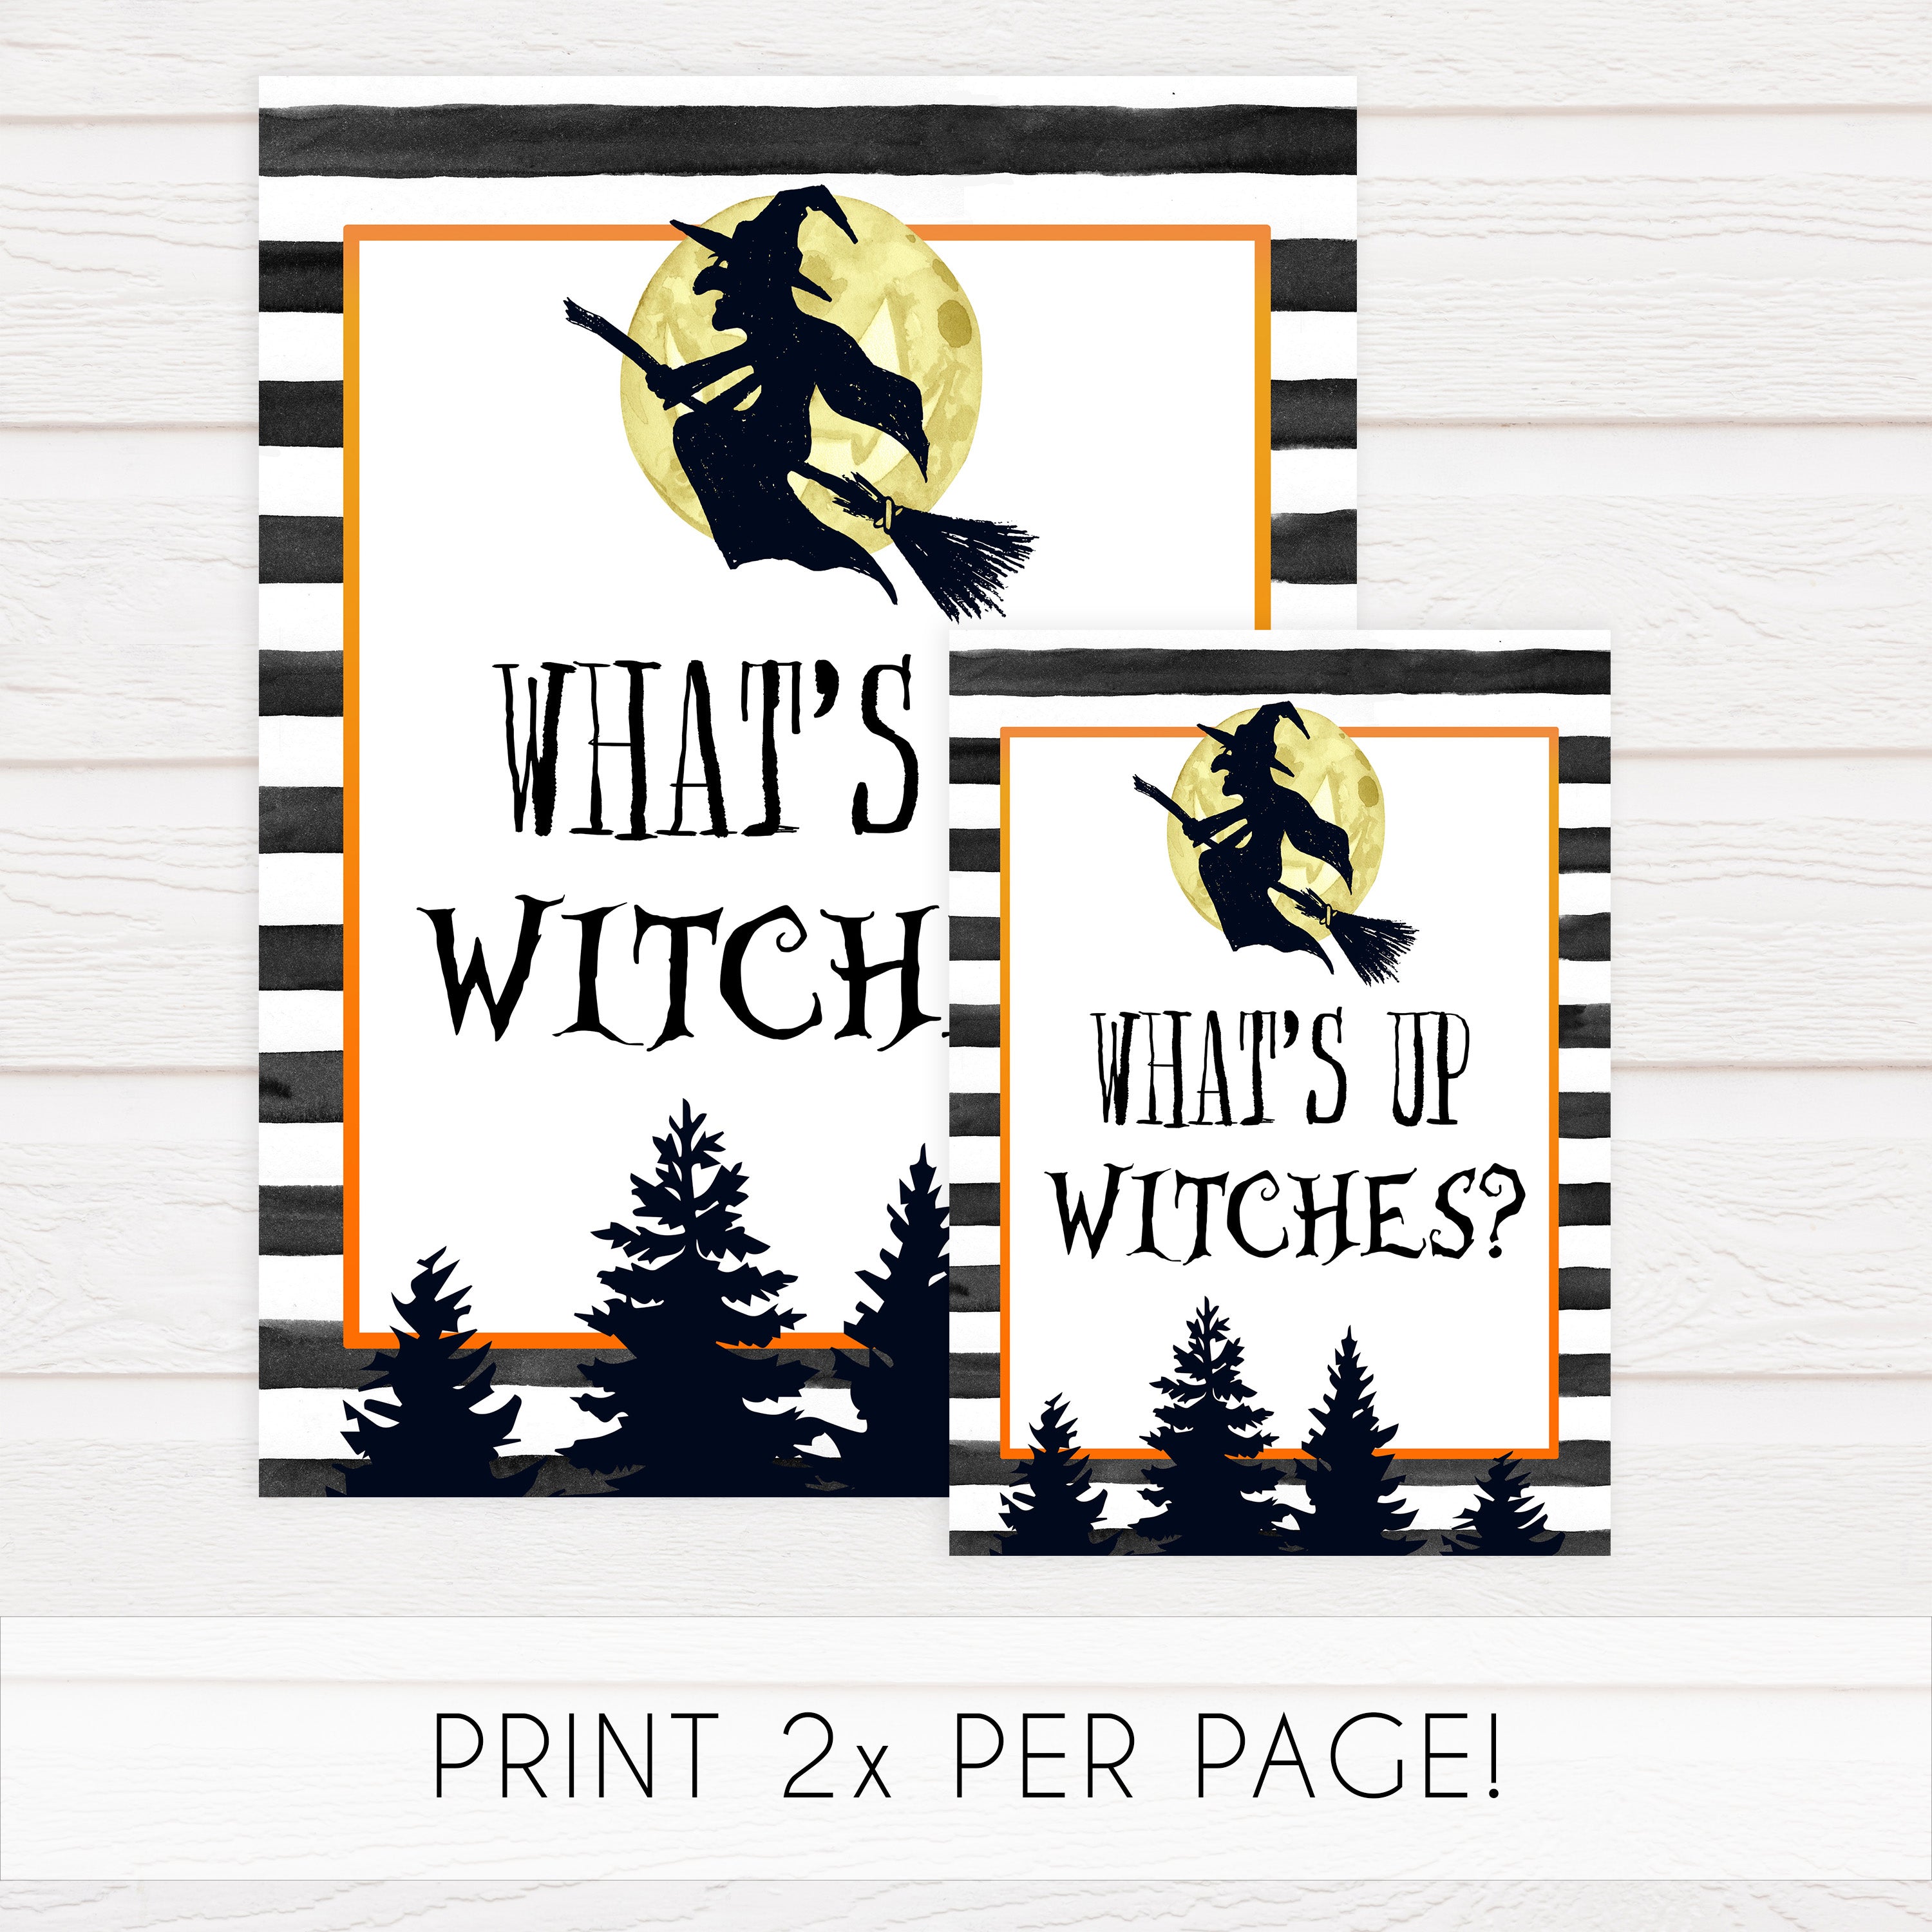 whats up witches sign, halloween table signs, printable halloween table signs, spooky halloween decor, halloween decor